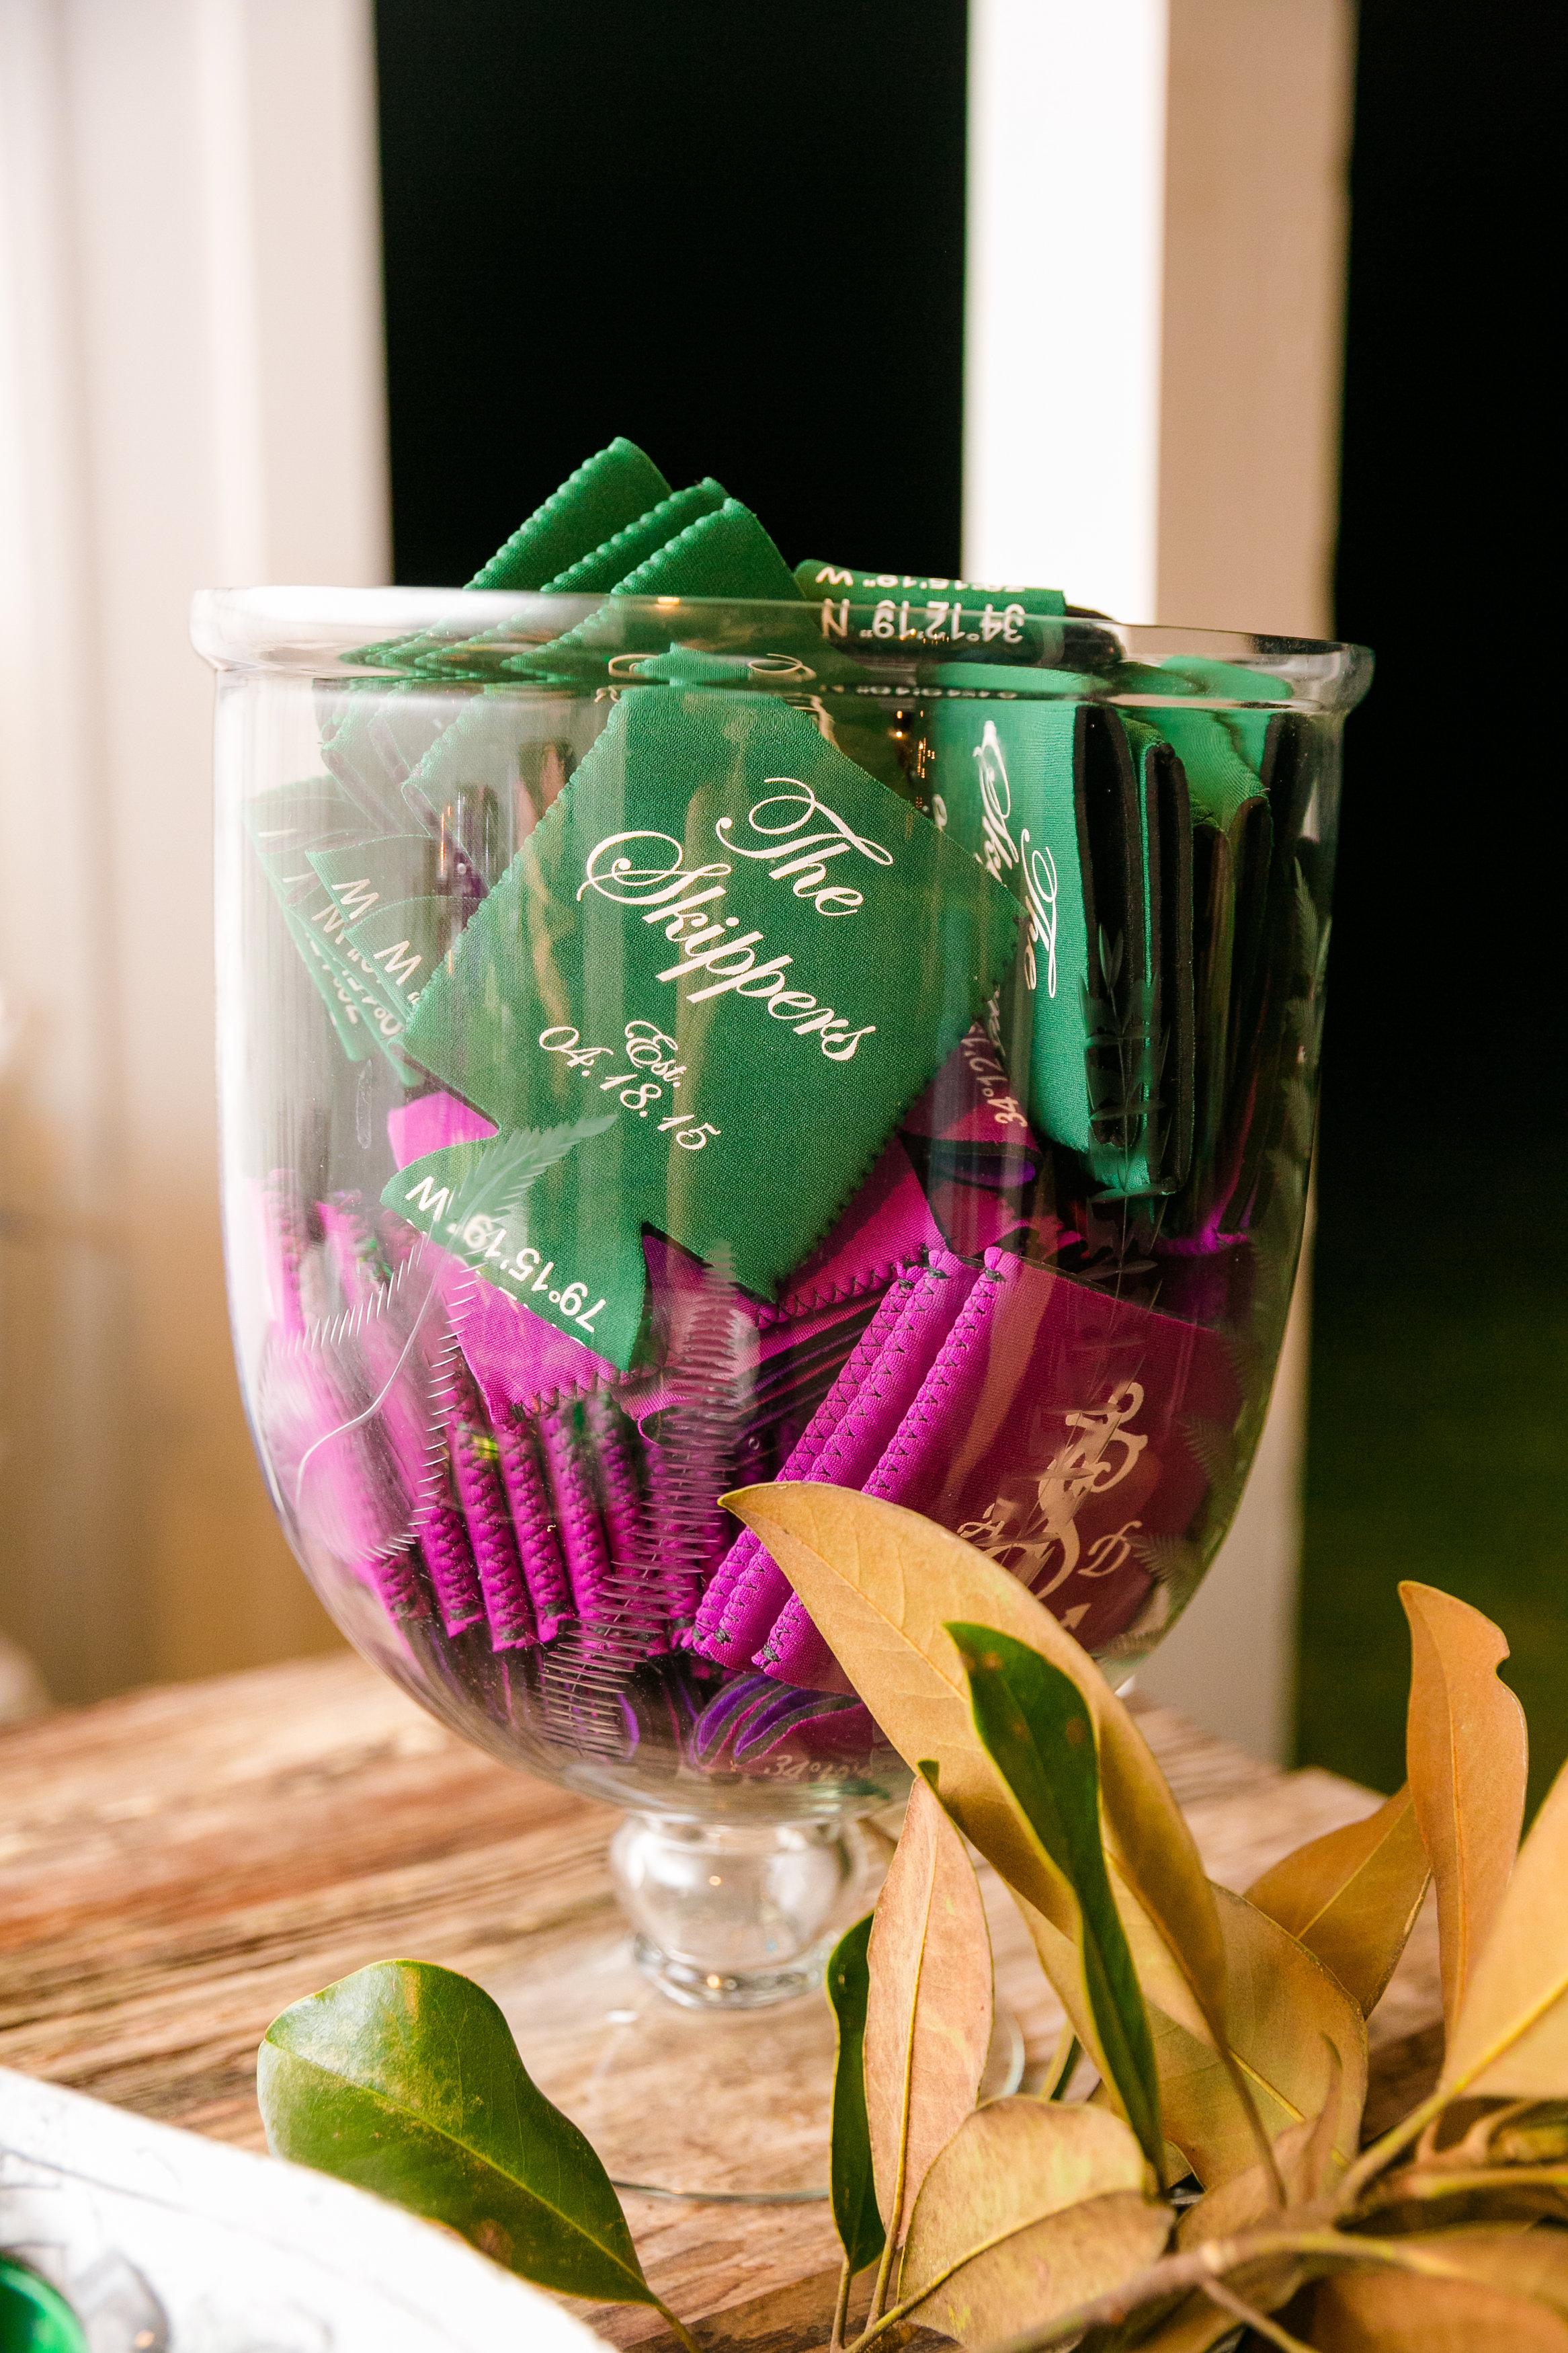 nautical-koozies-with-wedding-logo-and-longitude-latitude-guest-favors-fuchsia-and-kelly-green-wedding-colors